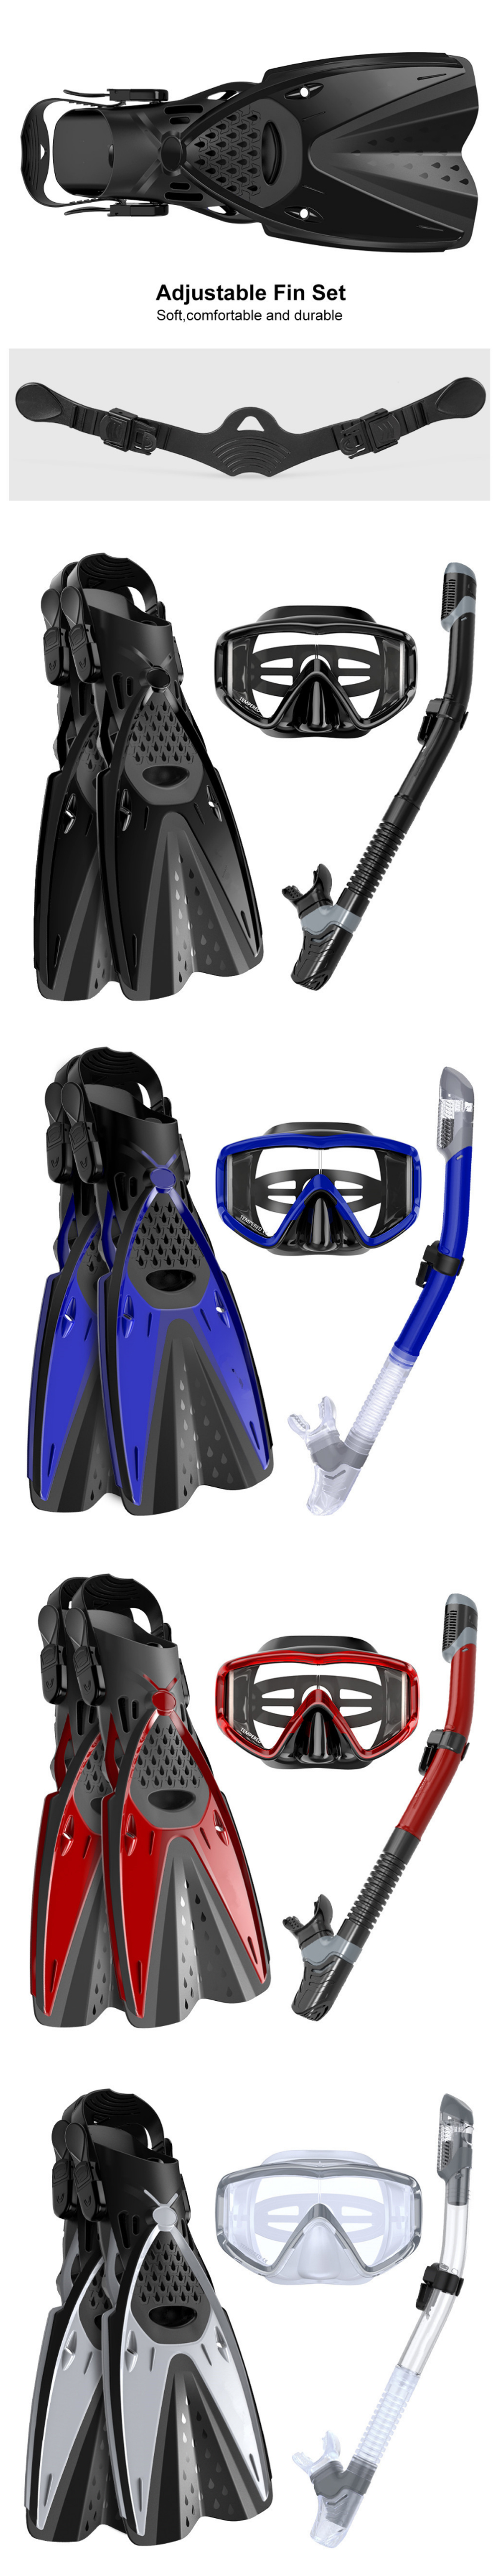 HHAOSPORT-3PCSSet-Snorkel-Mask-Swimming-Goggles--Underwater-Breathing-Tube--Diving-Fins-Diving-Equip-1718634-3